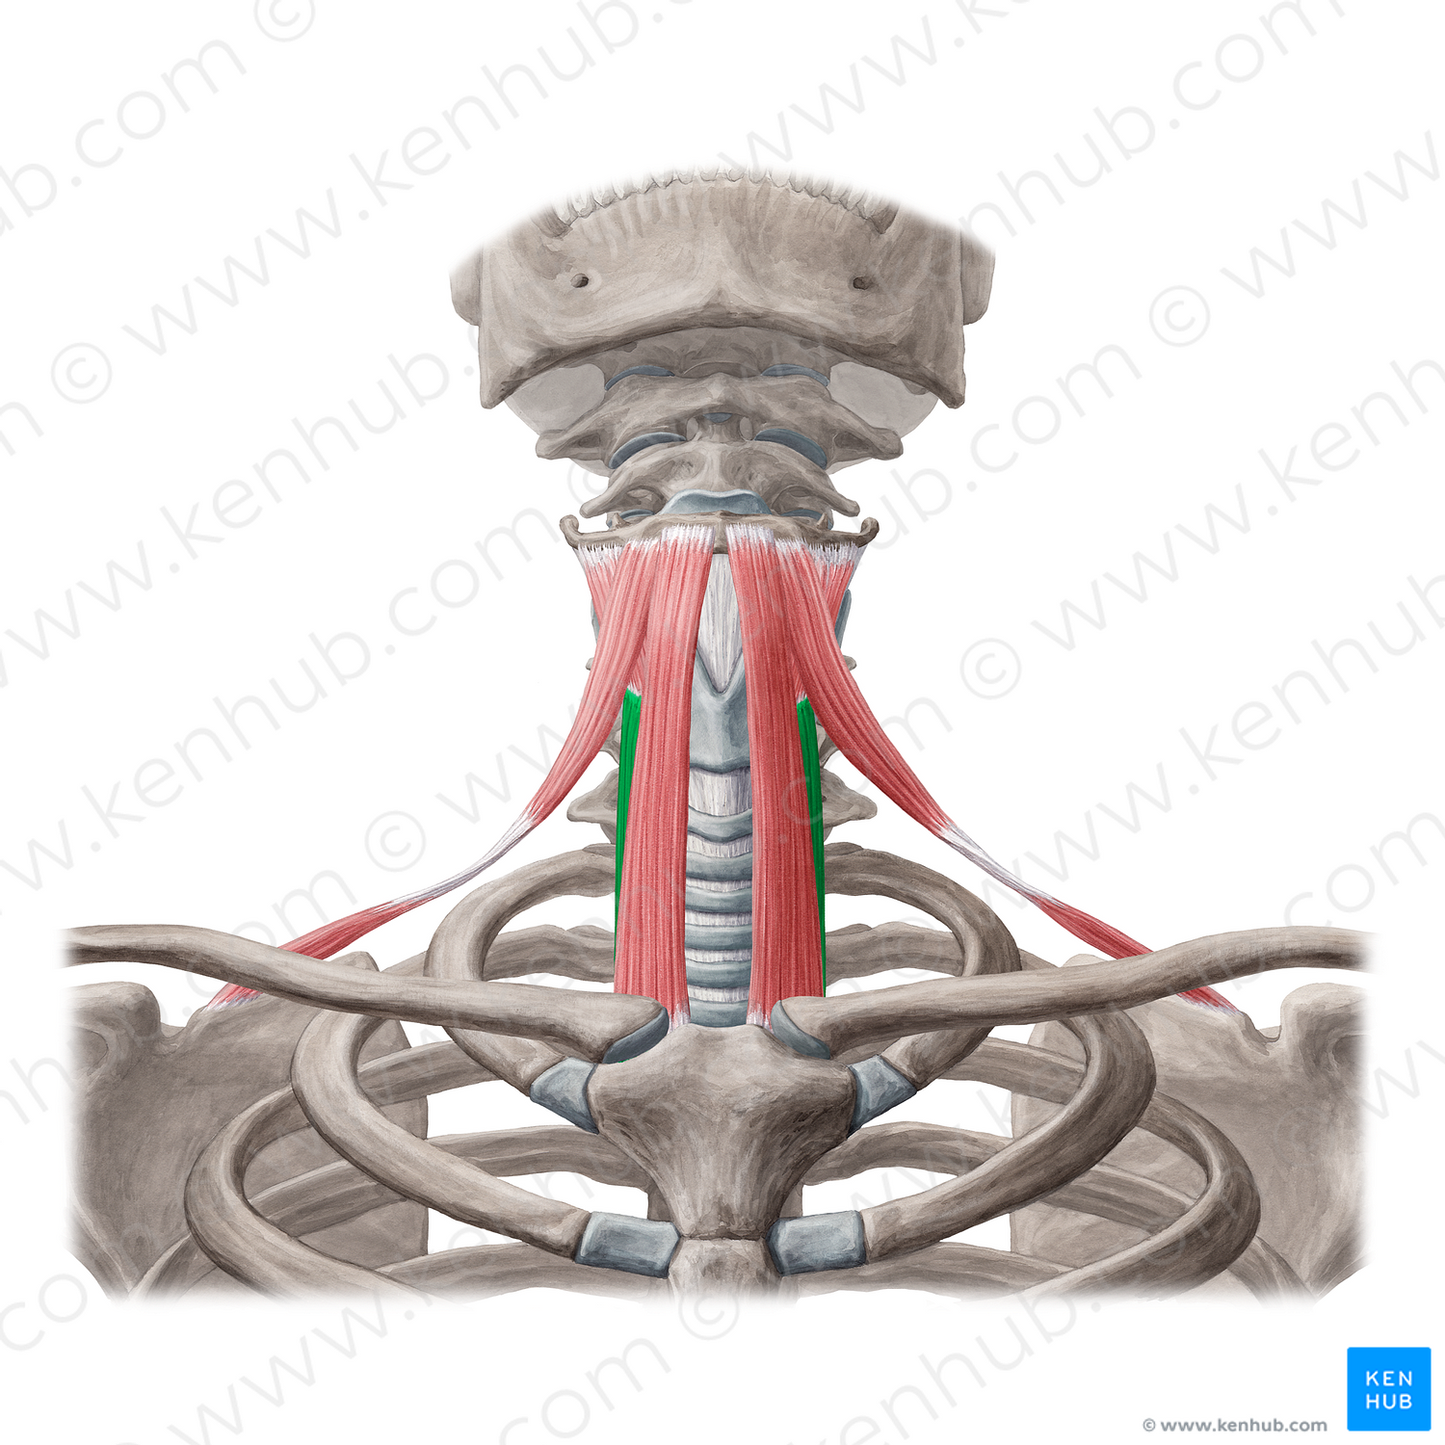 Sternothyroid muscle (#6026)